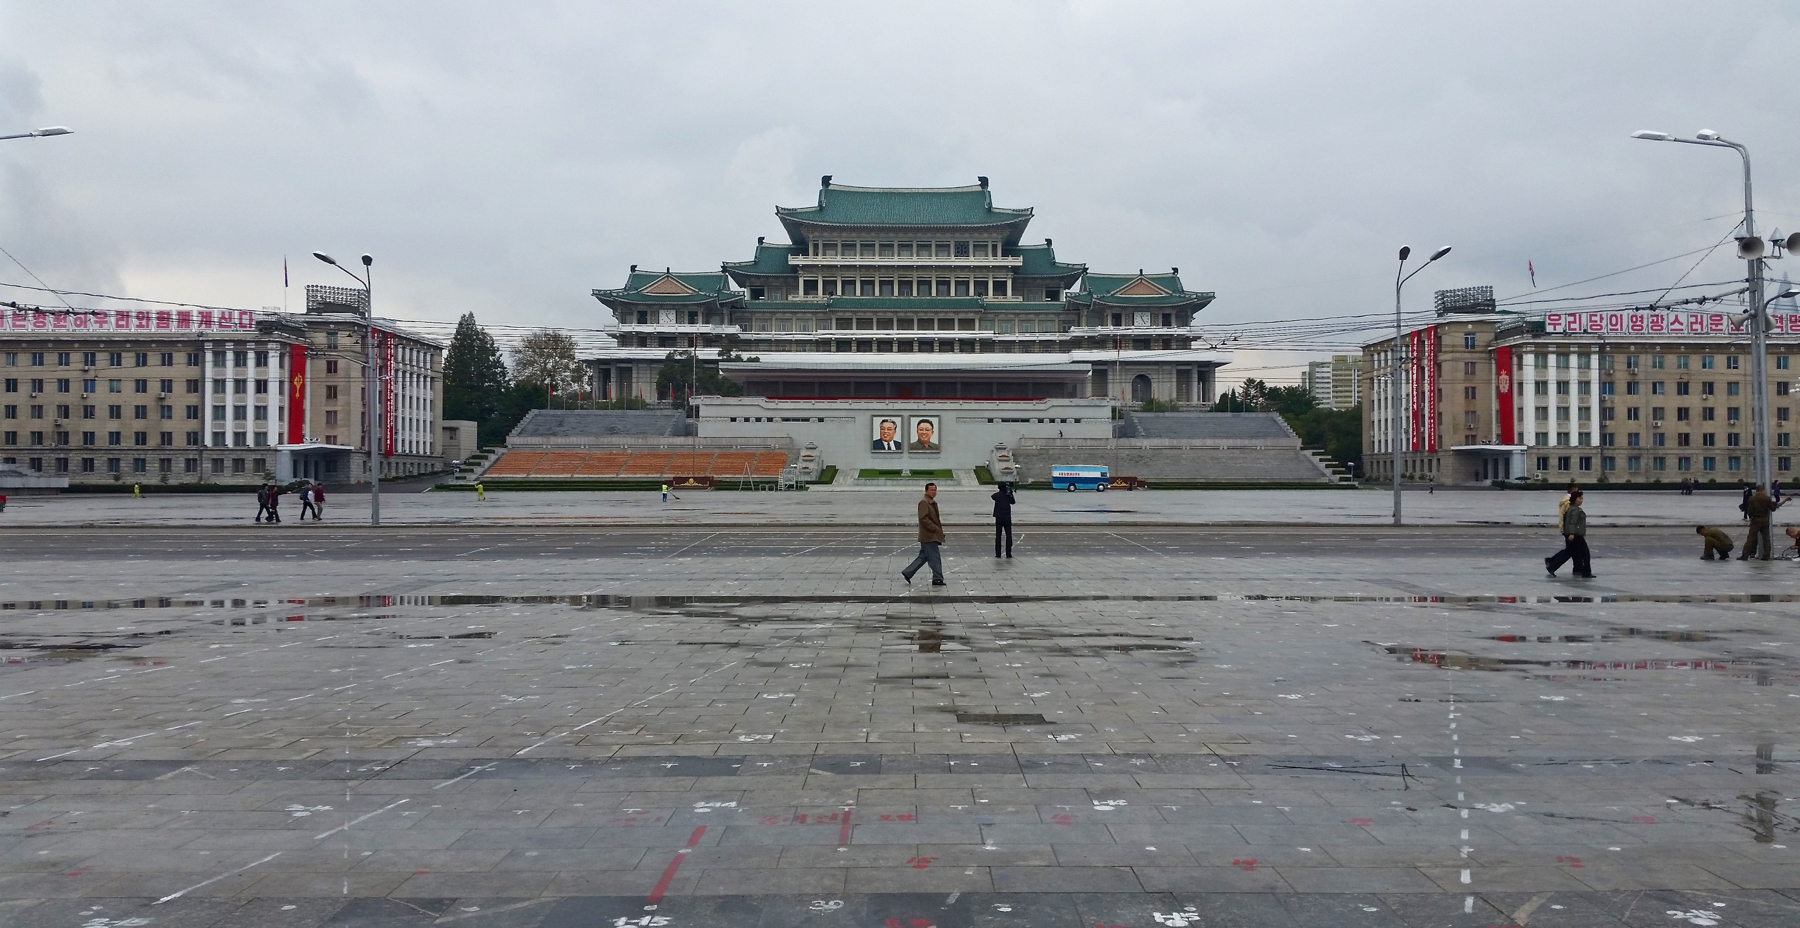 Kim Il-sung Square, the day after the enormous parades. You can see the lines and marks on the ground which had been used to coordinate different groups in their movements. Oh, and that's our camera team on the right.